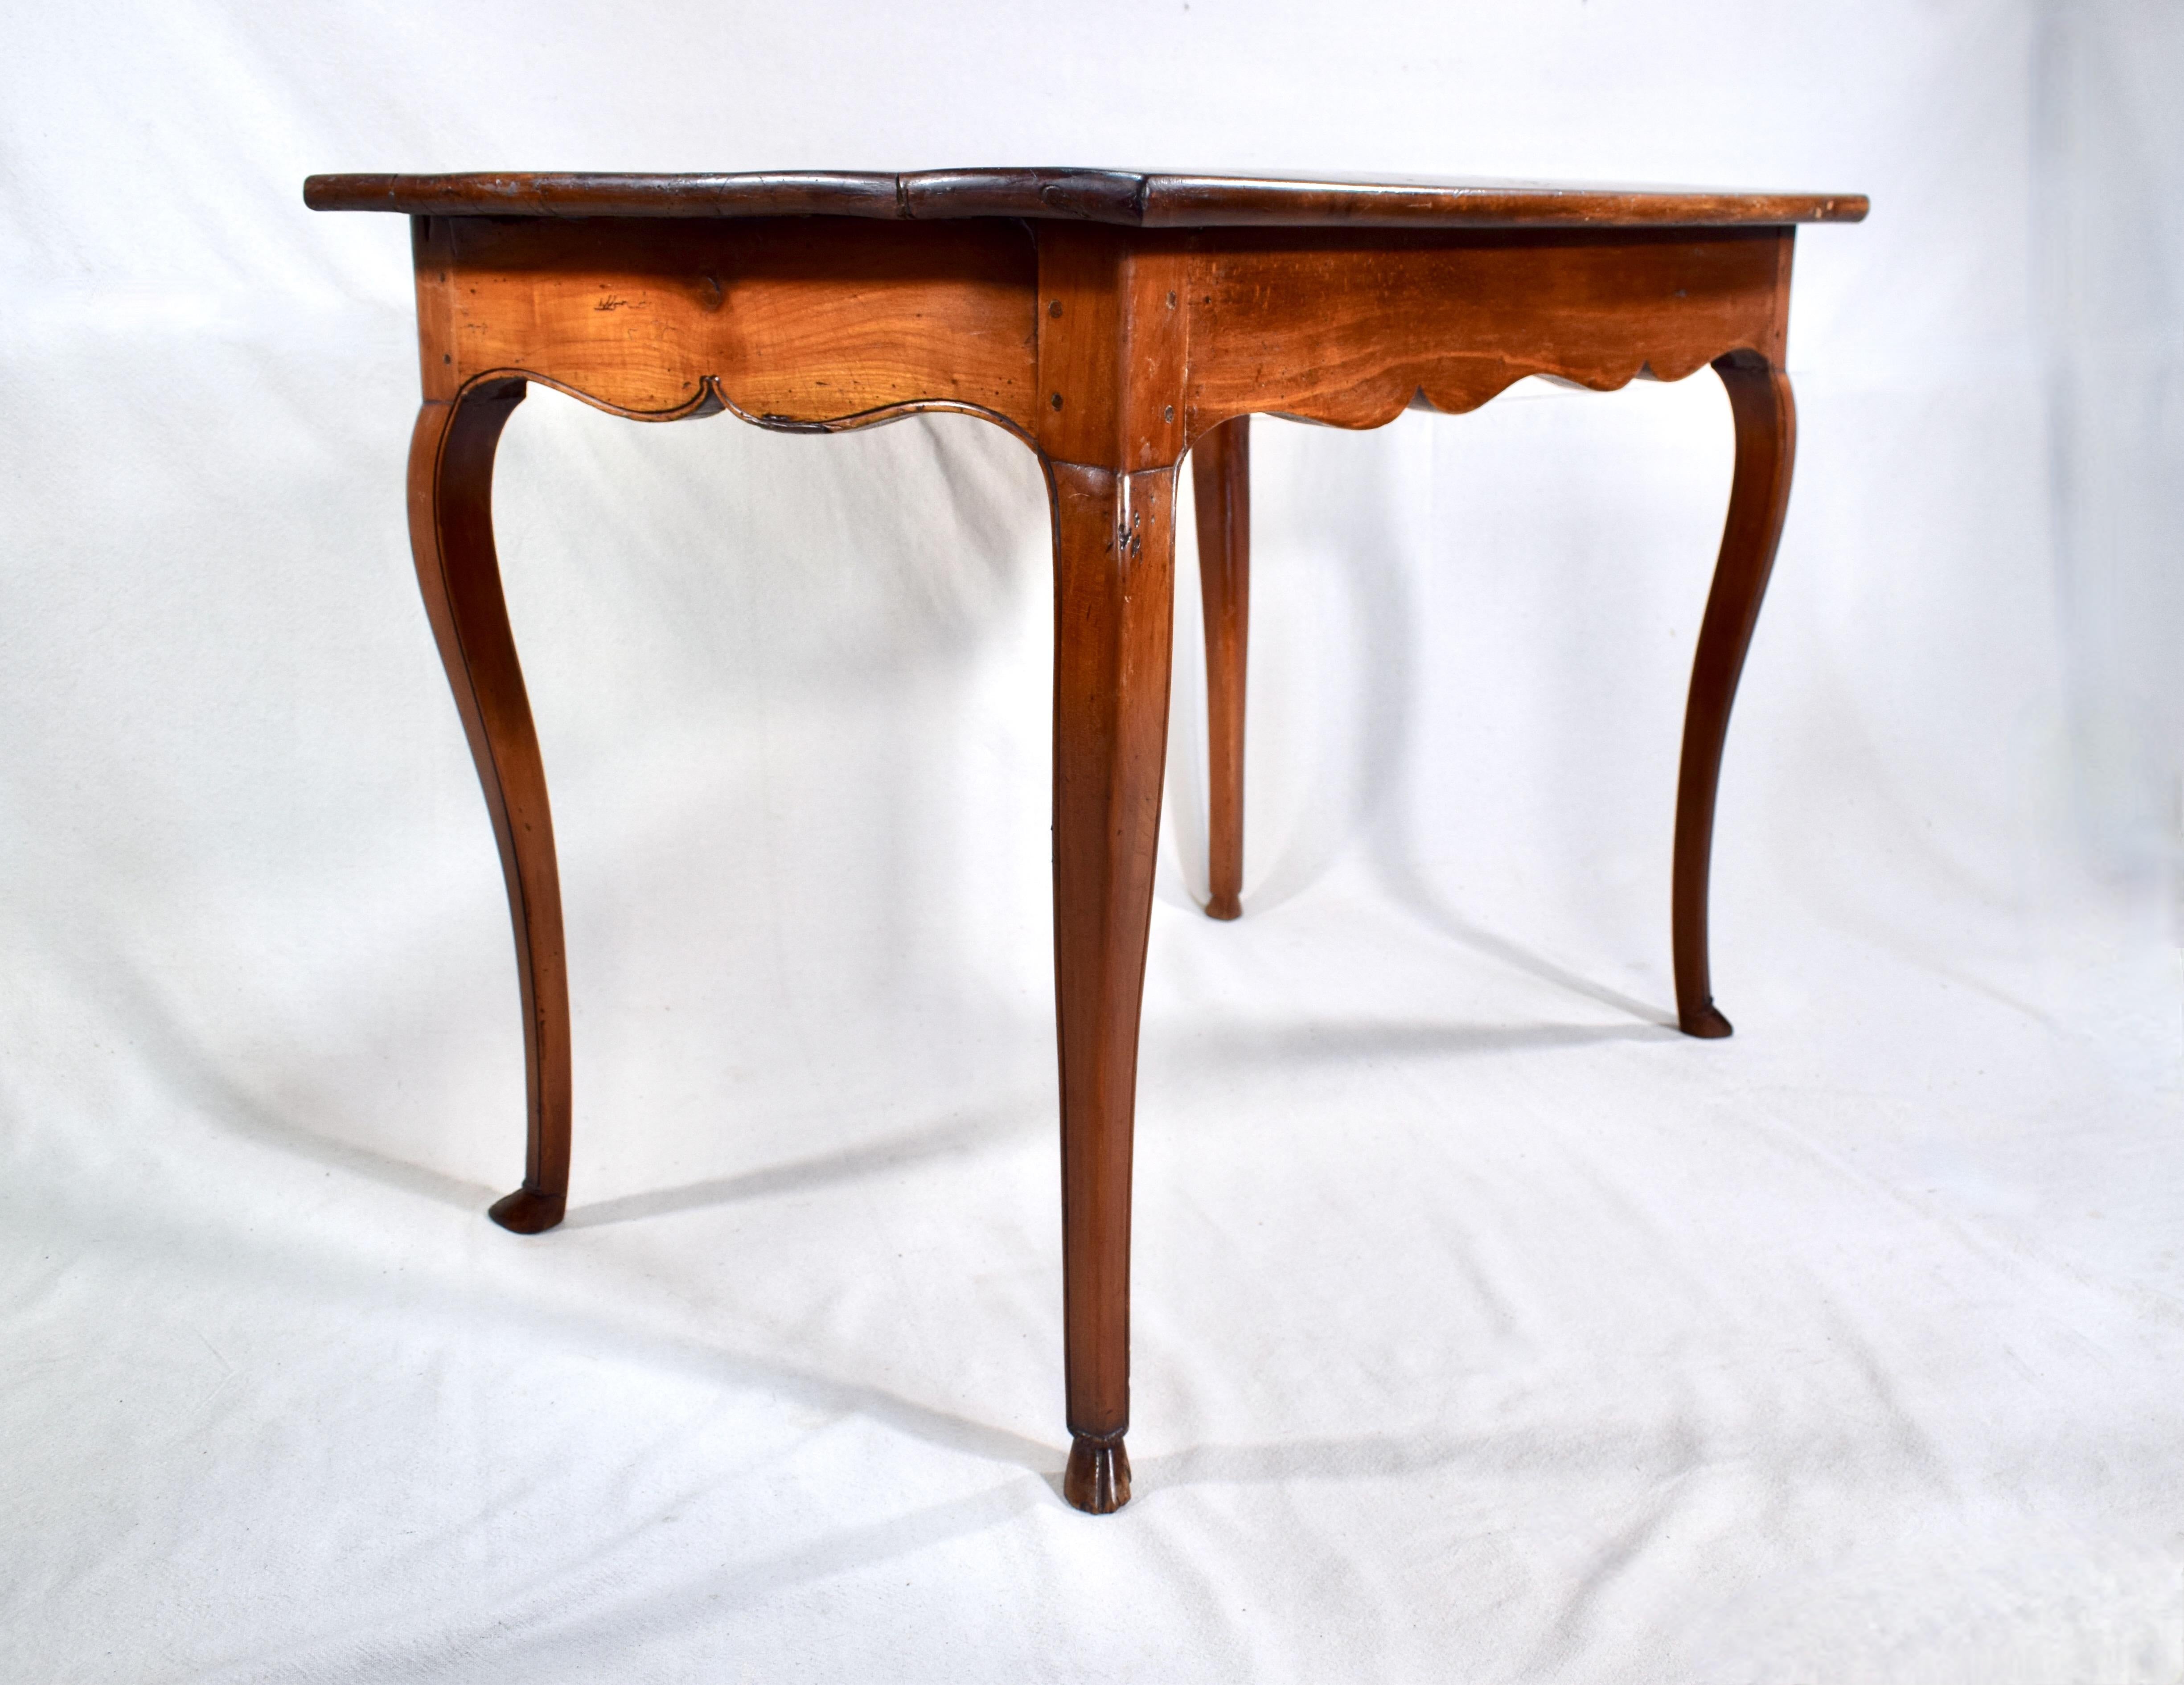 French Mid-18th Century Louis XV Period Petit Desk or Side Table For Sale 8